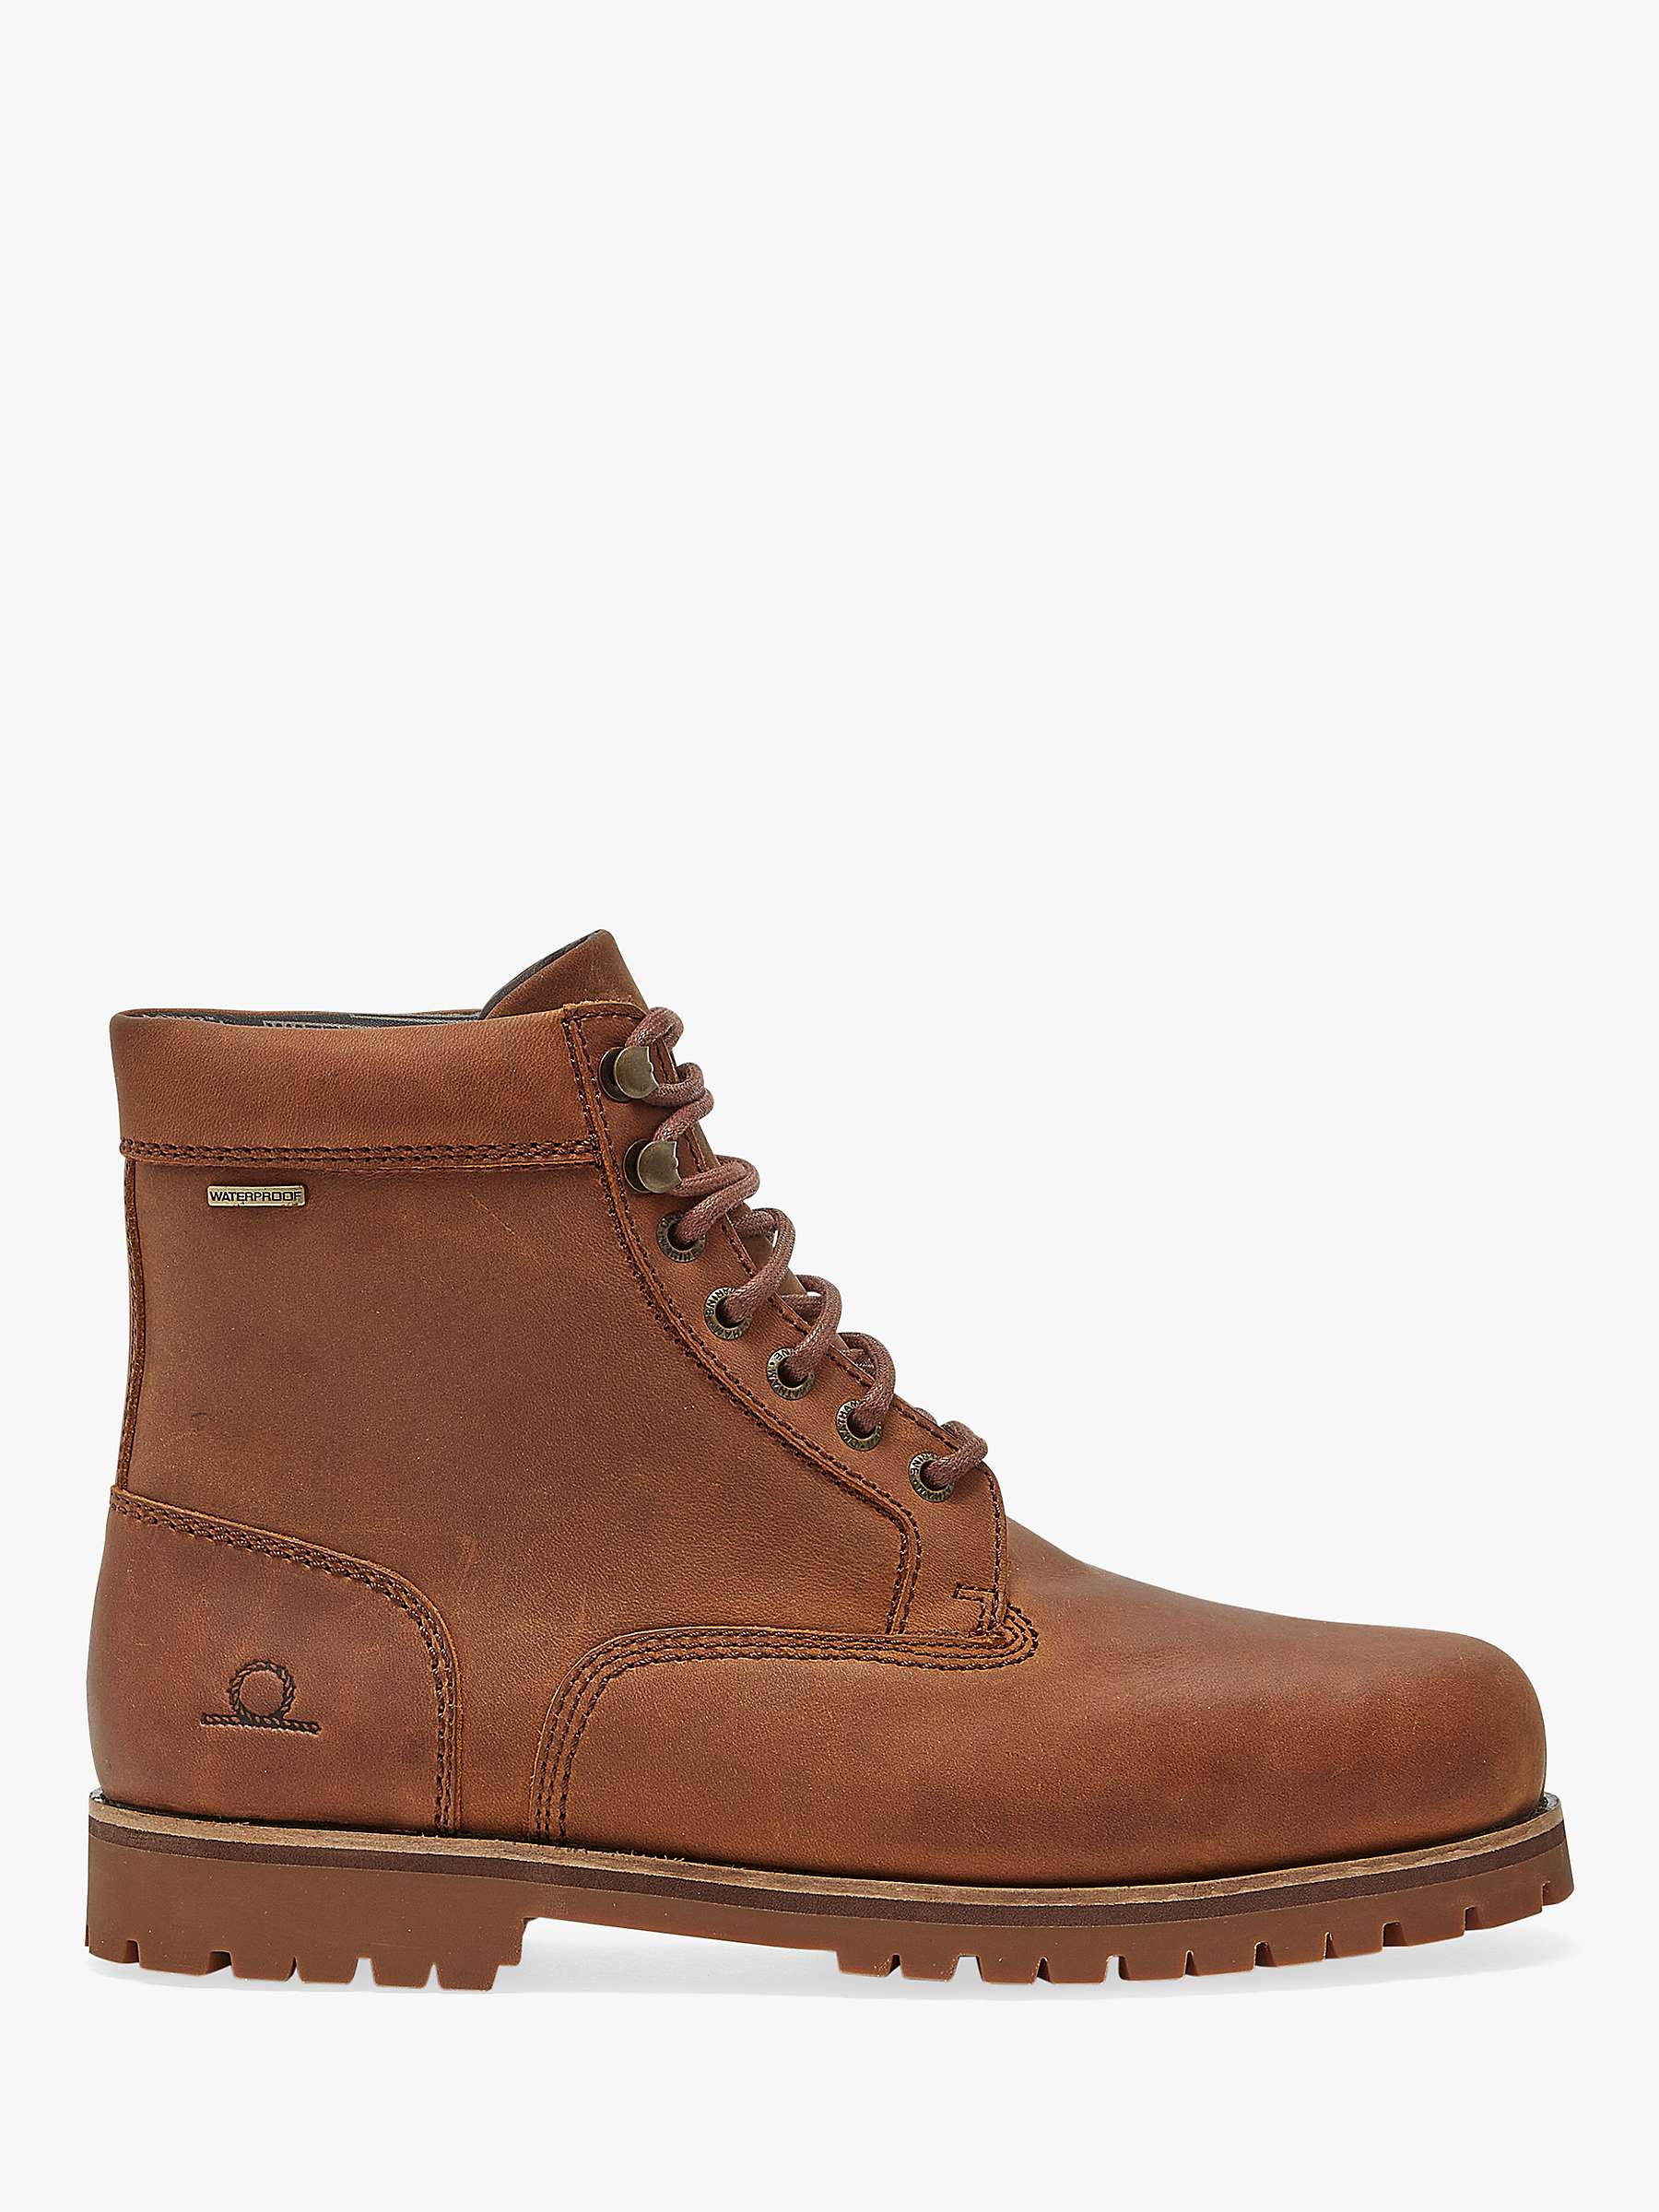 Buy Chatham Standen Leather Ankle Boots, Walnut Online at johnlewis.com